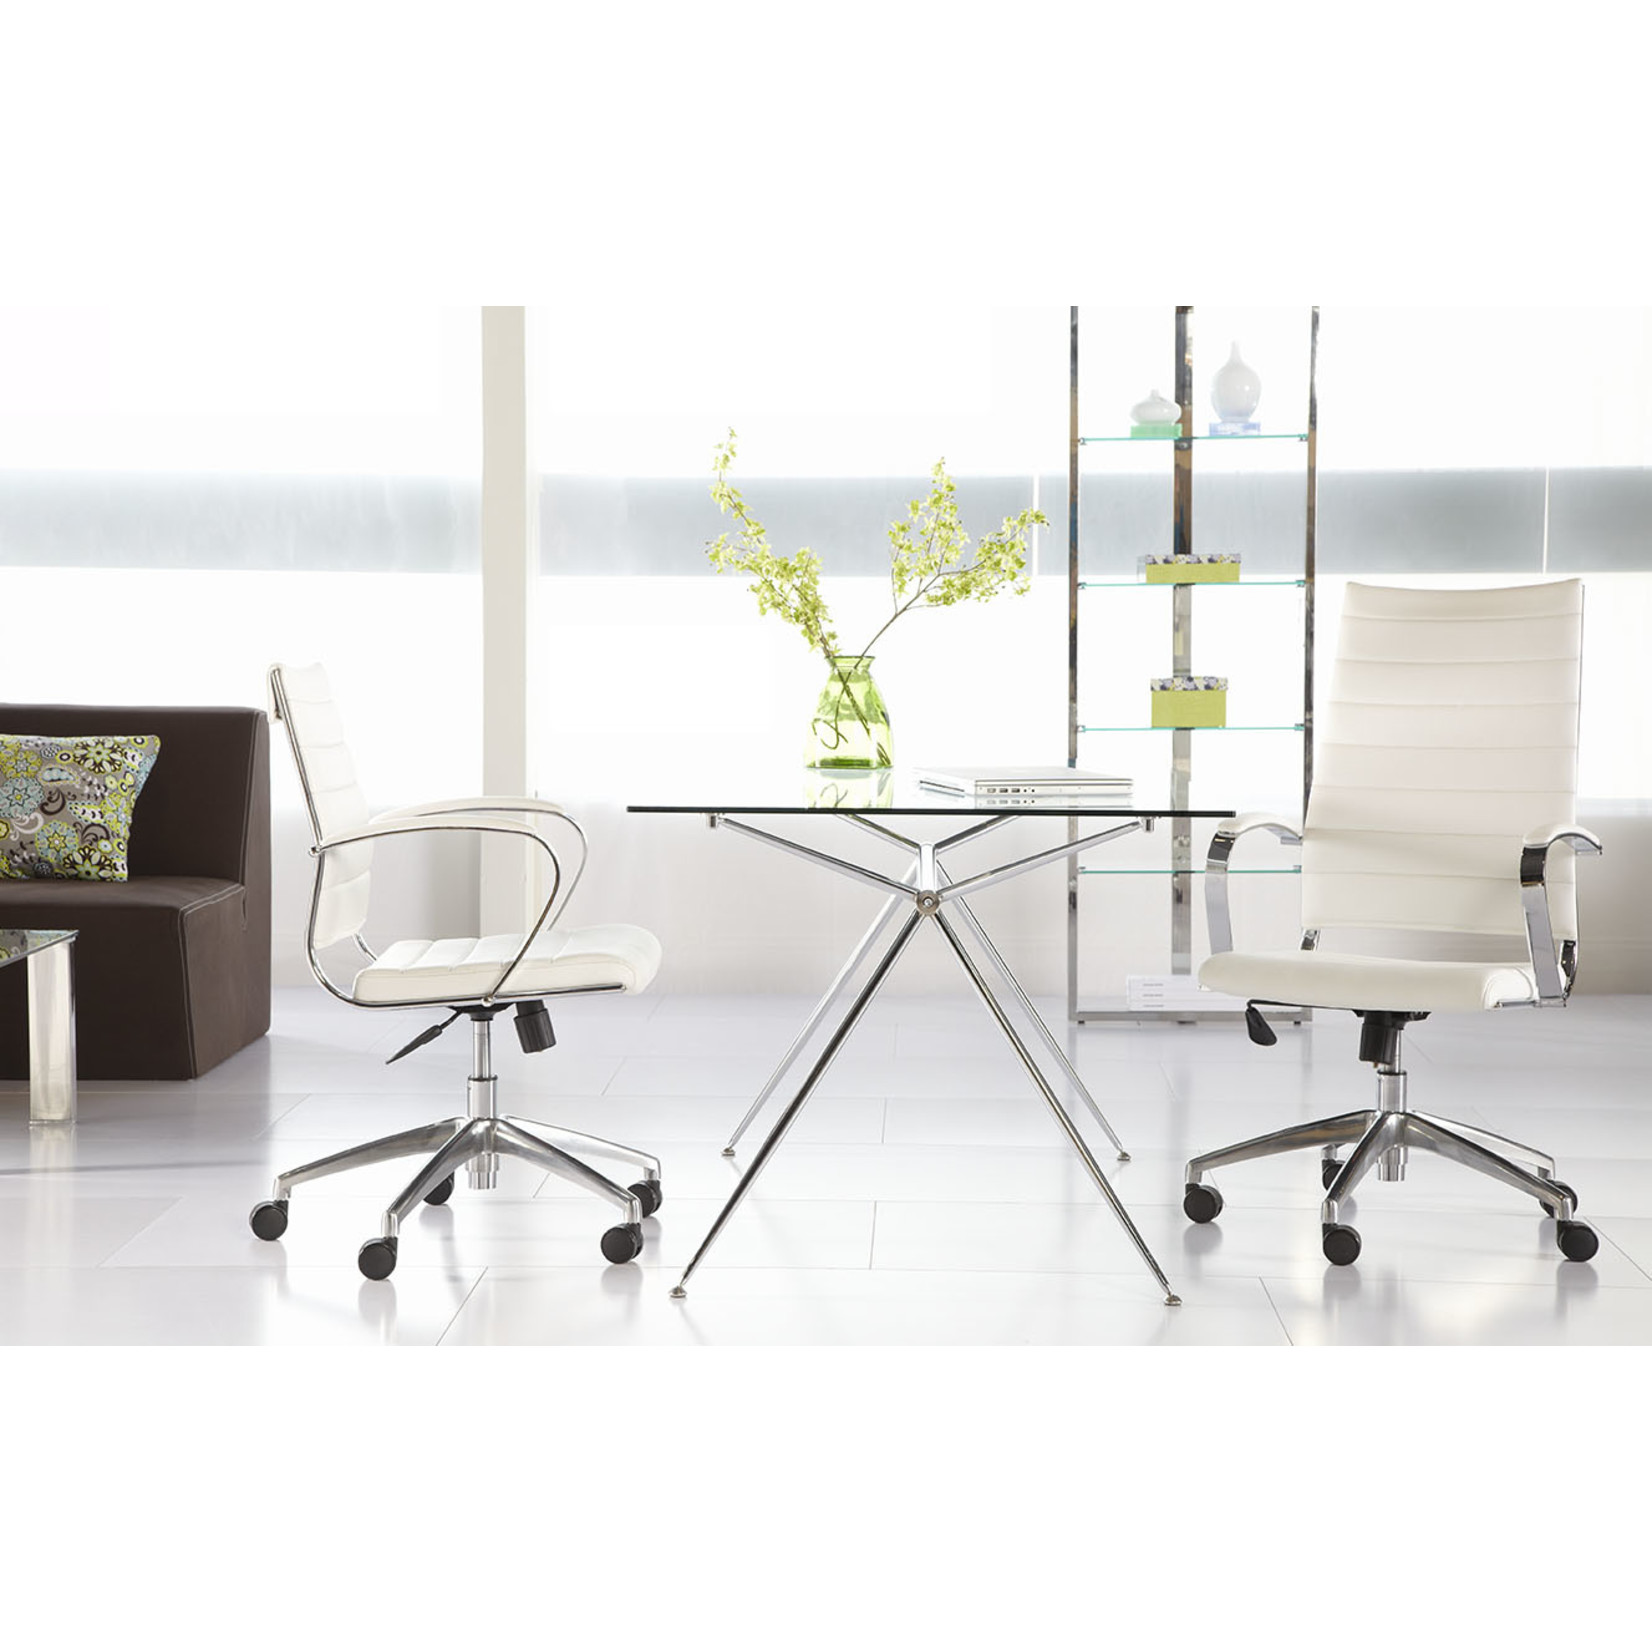 Axel HB Office Chair White